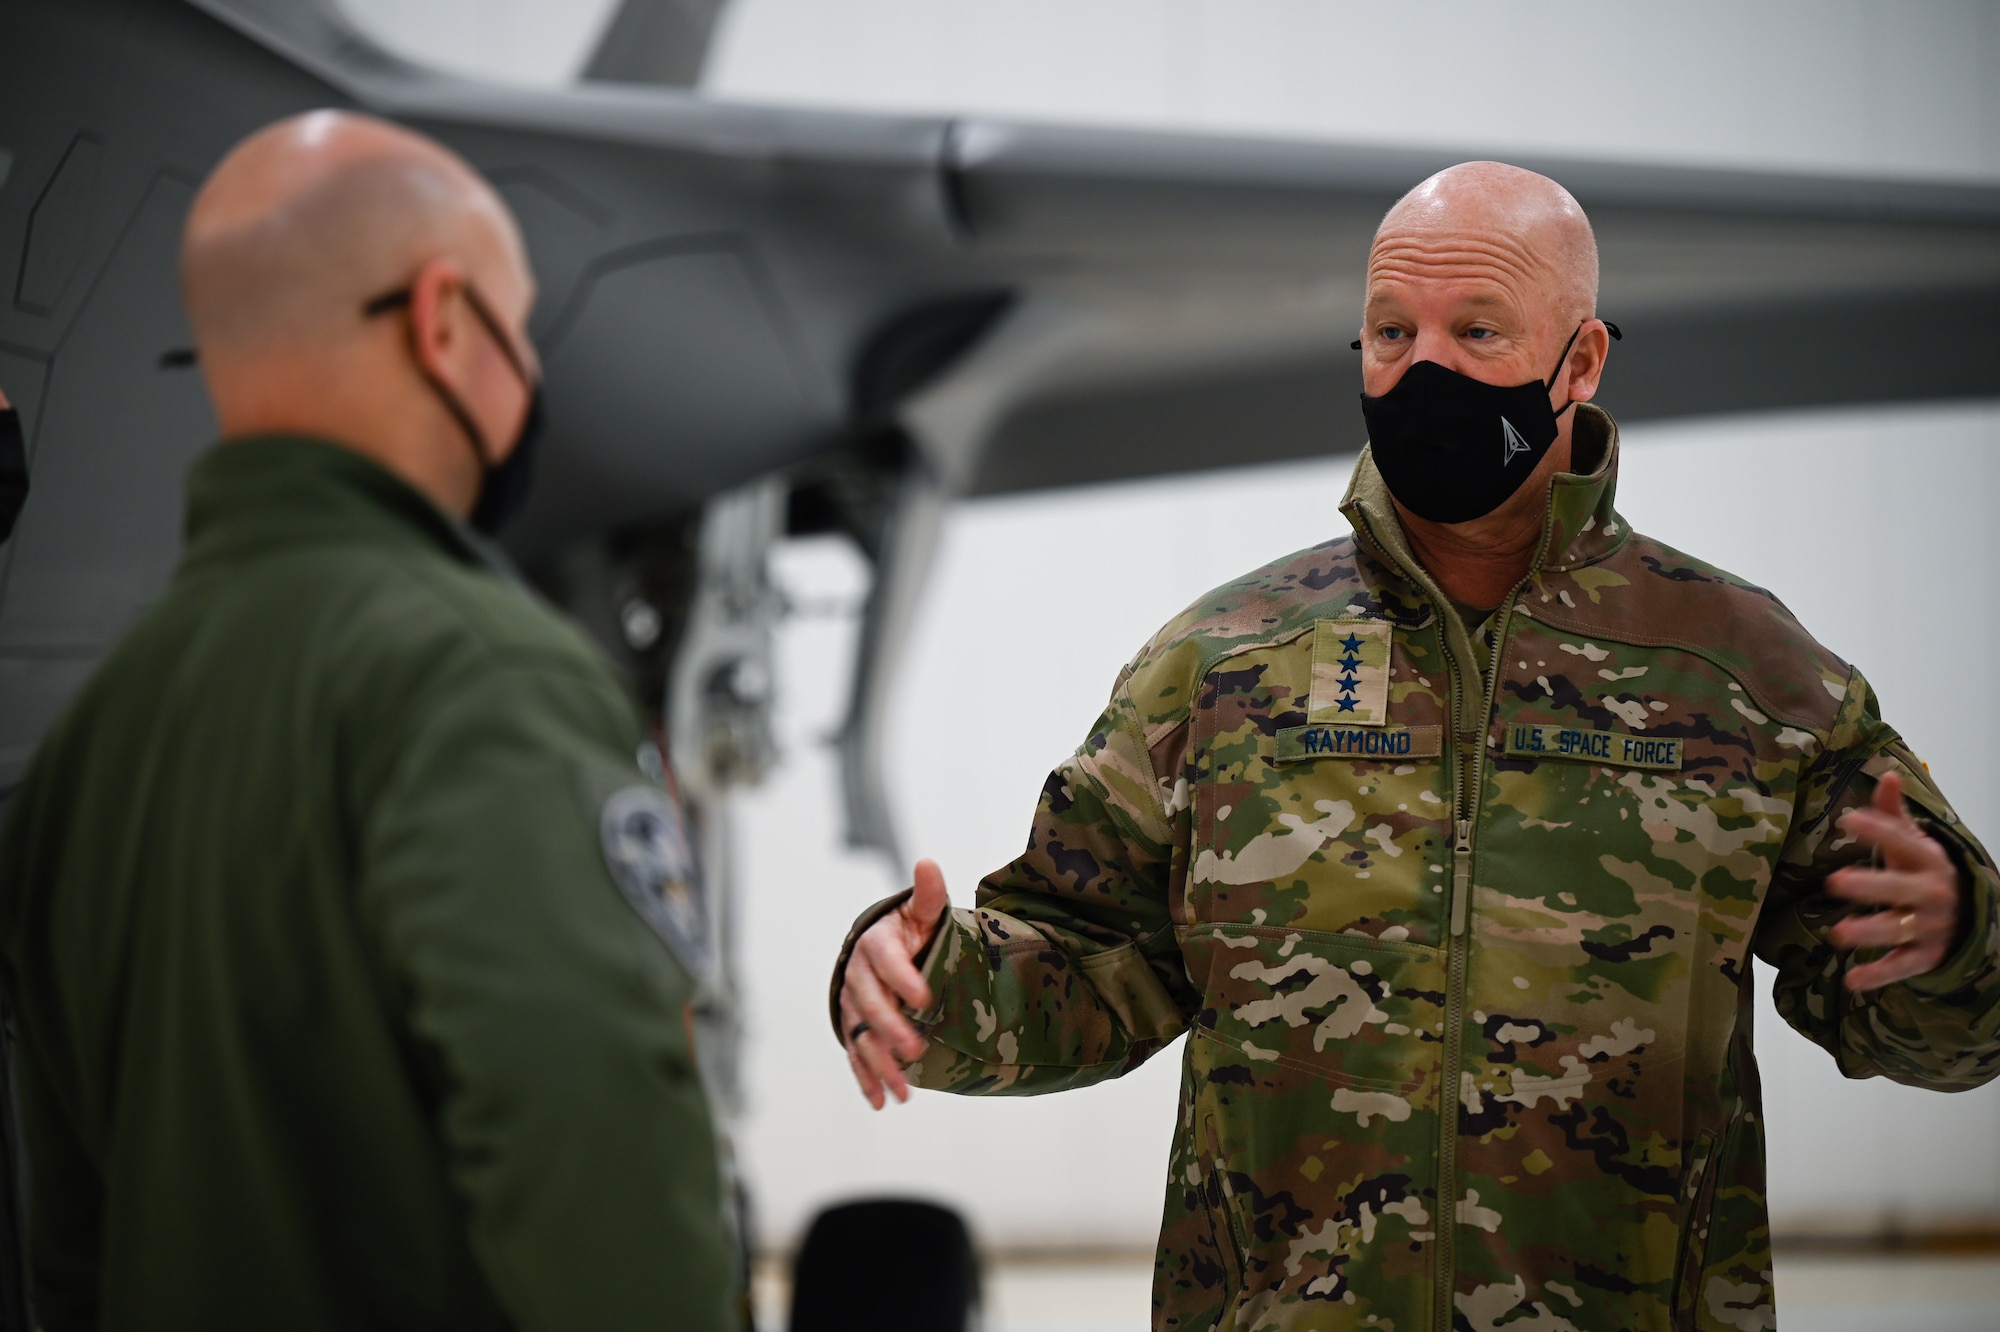 U.S. Air Force Col. David Berkland, the 354th Fighter Wing commander, talks to U.S. Space Force Gen. John W. “Jay” Raymond, Chief of Space Operations, on Eielson Air Force Base, Alaska, March 10, 2021.